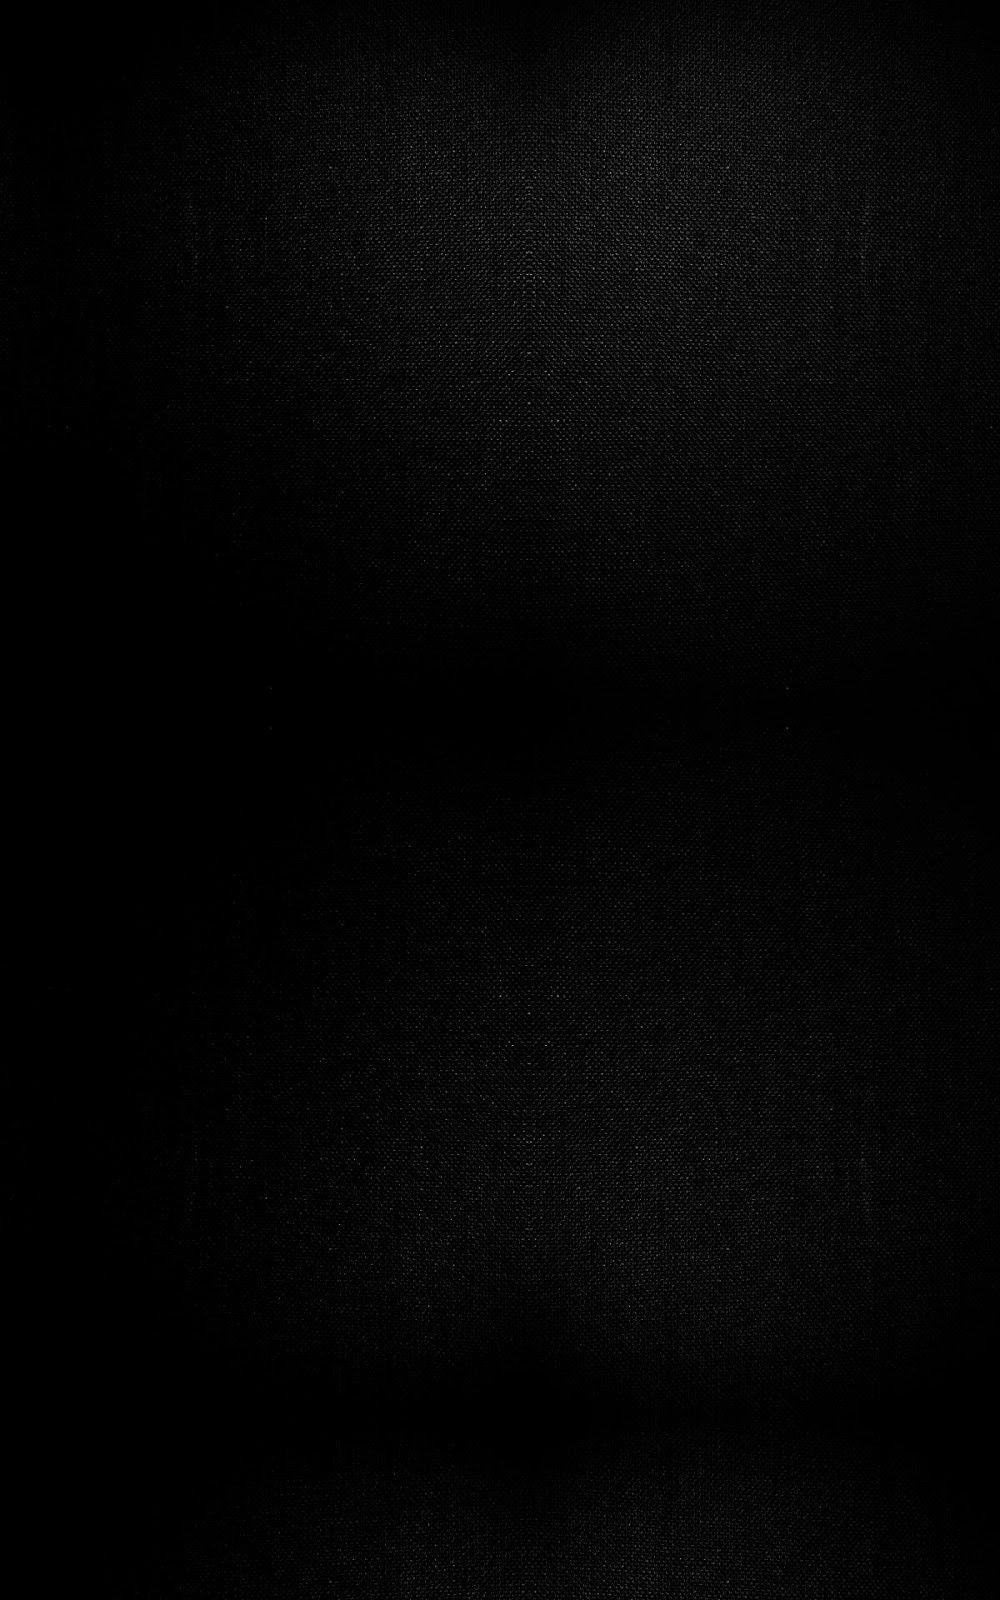 Solid Black Iphone Wallpapers - Wallpaper Cave